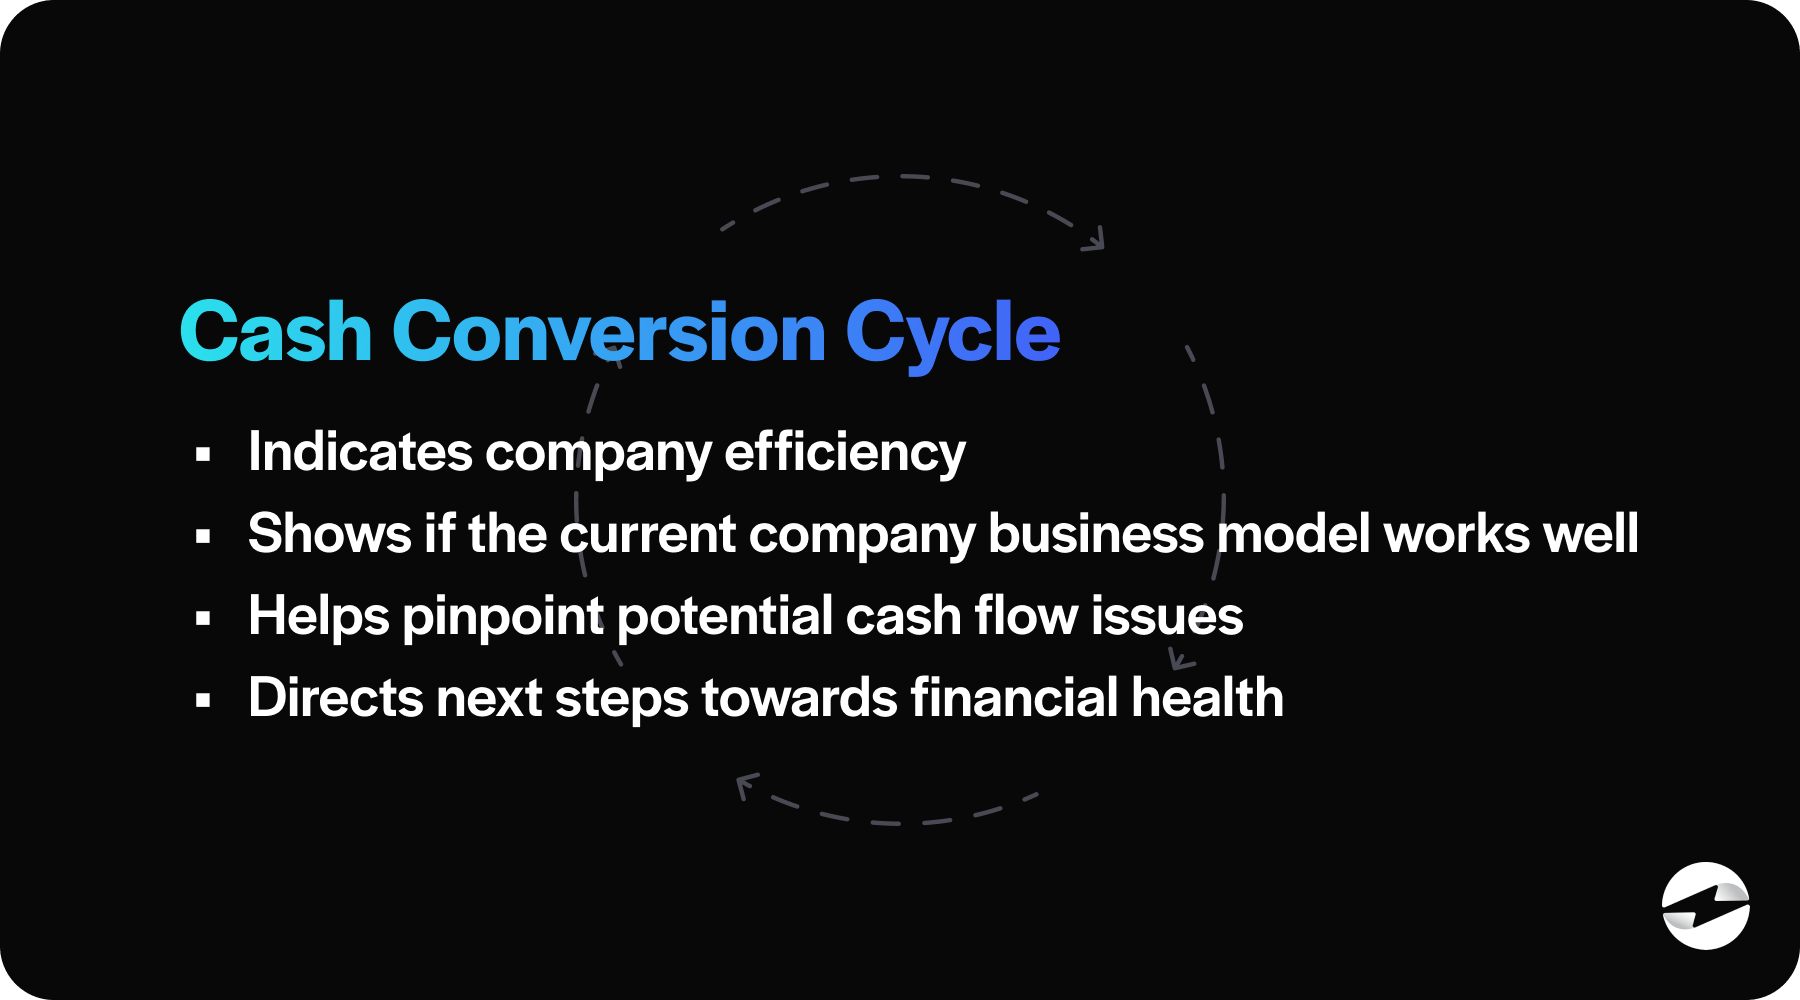 what is a cash conversion cycle?